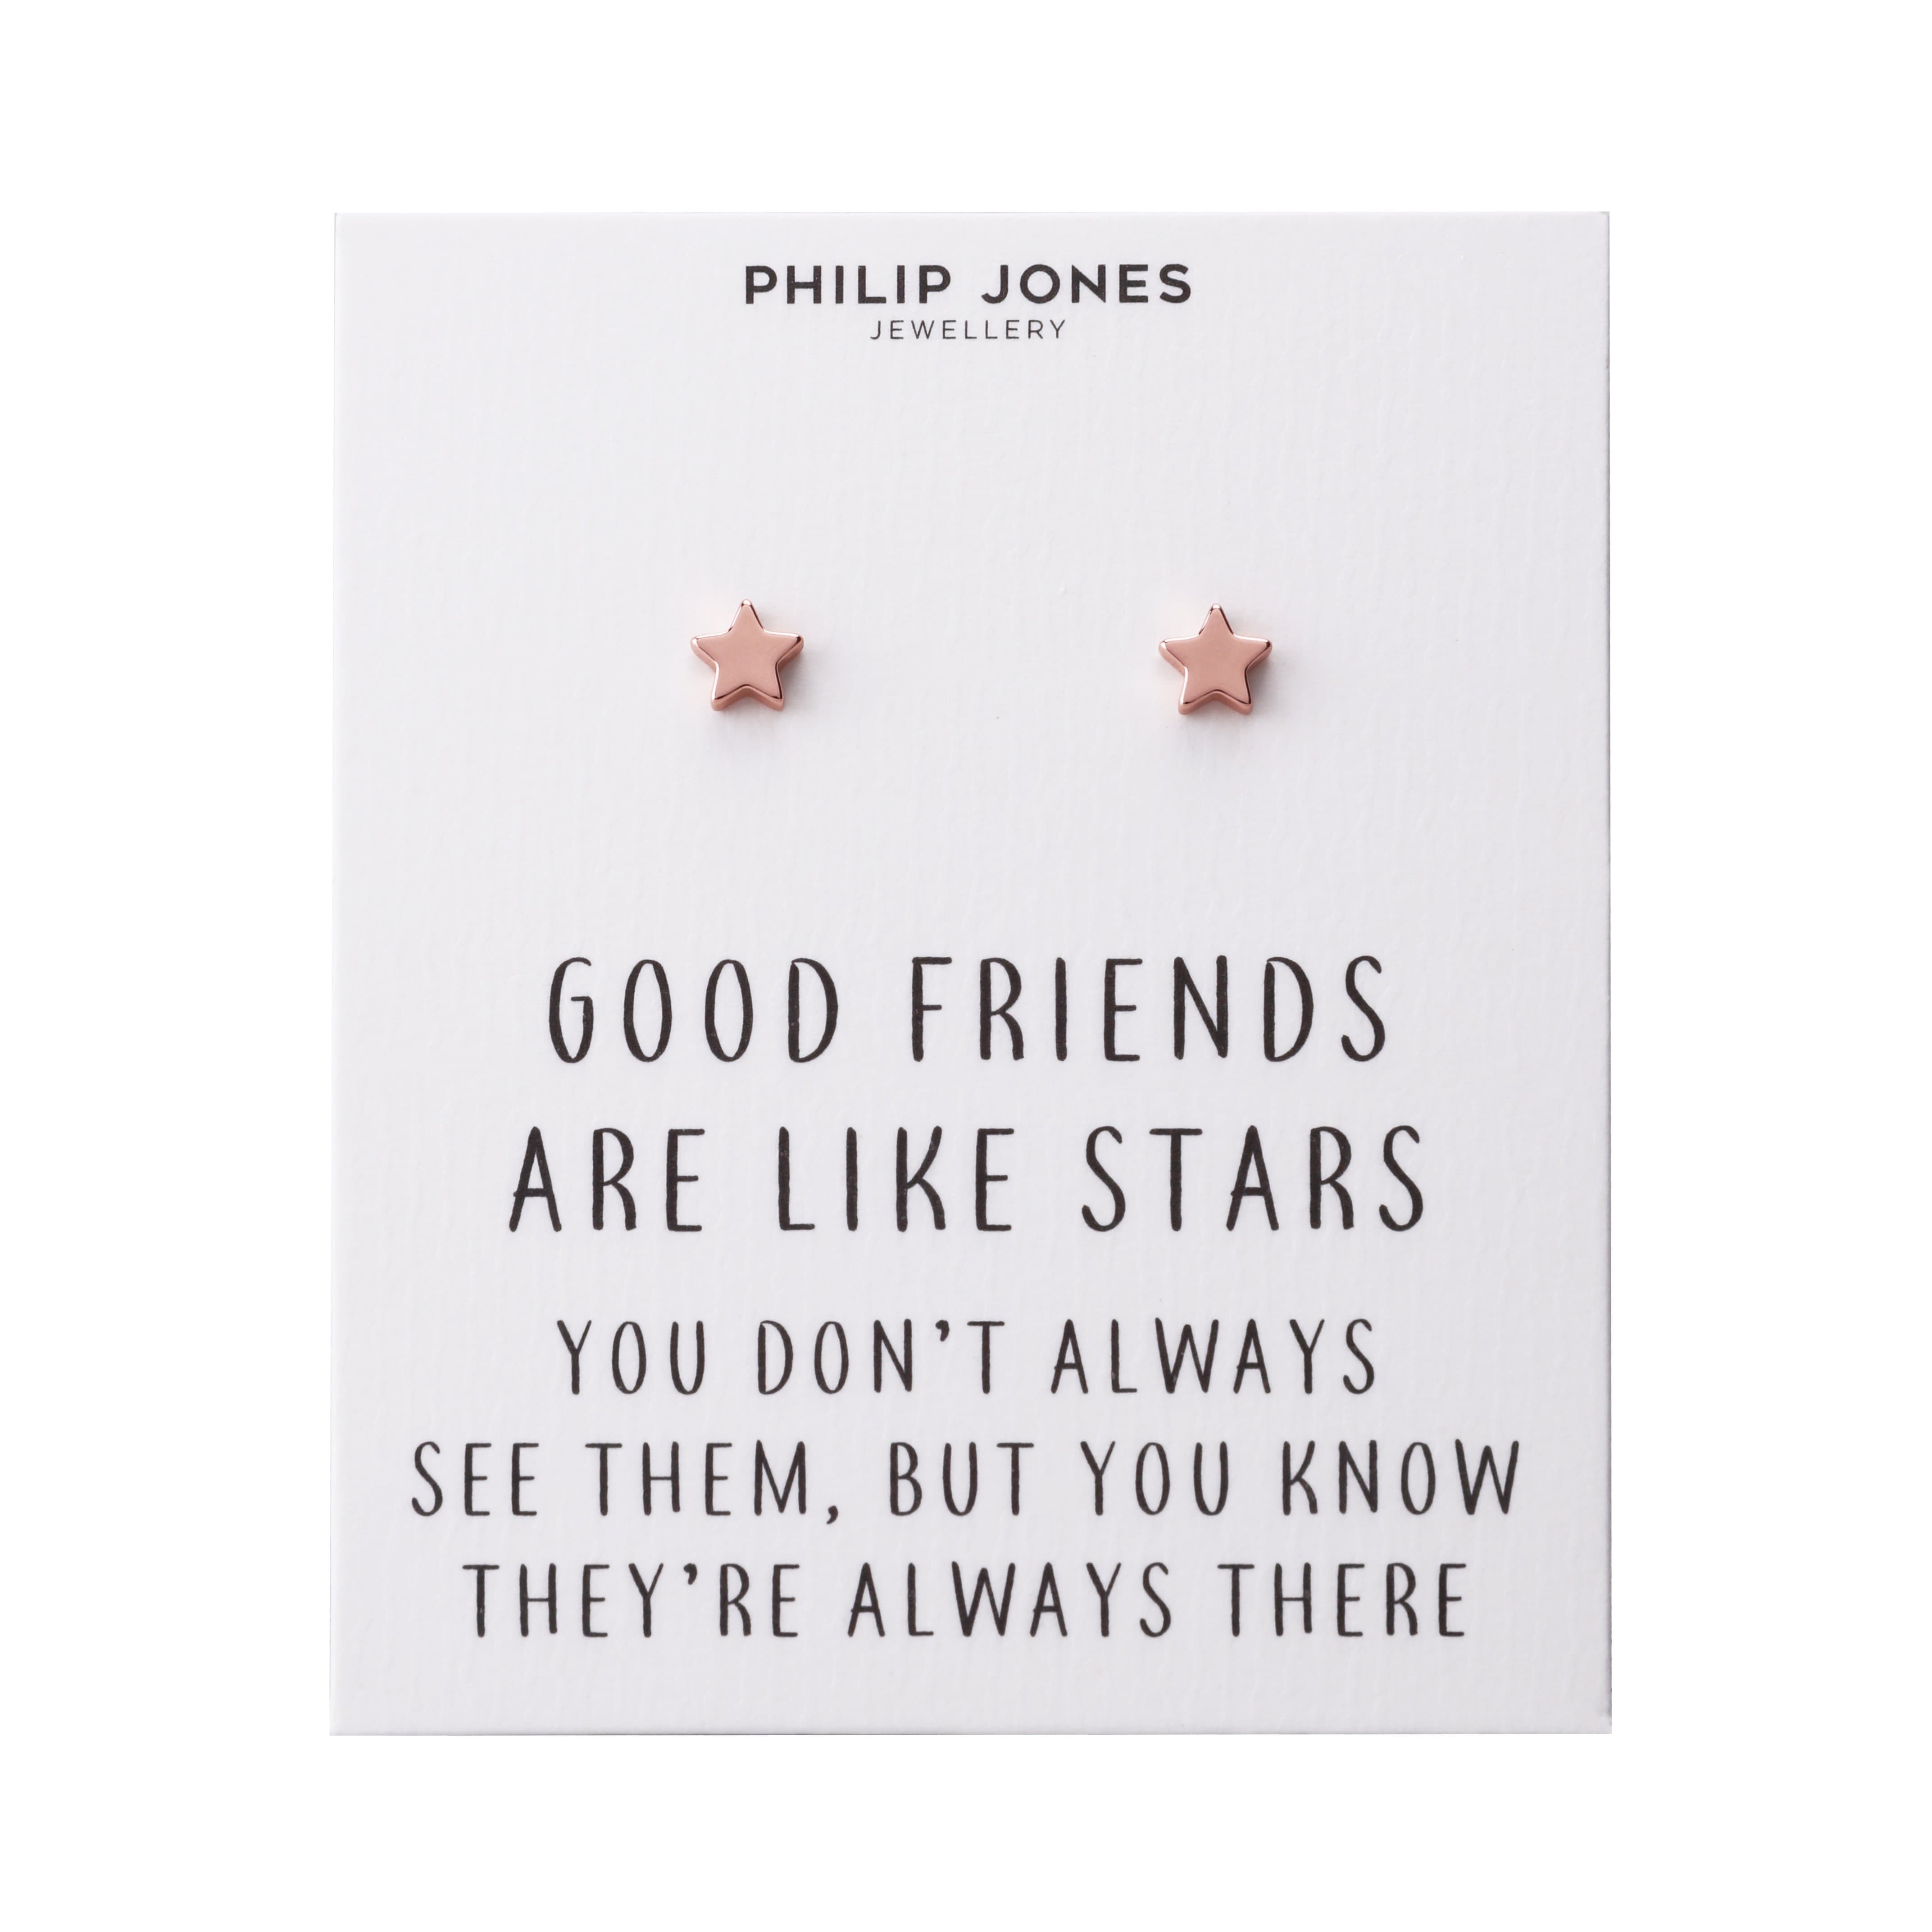 Rose Gold Plated Star Stud Earrings with Quote Card by Philip Jones Jewellery